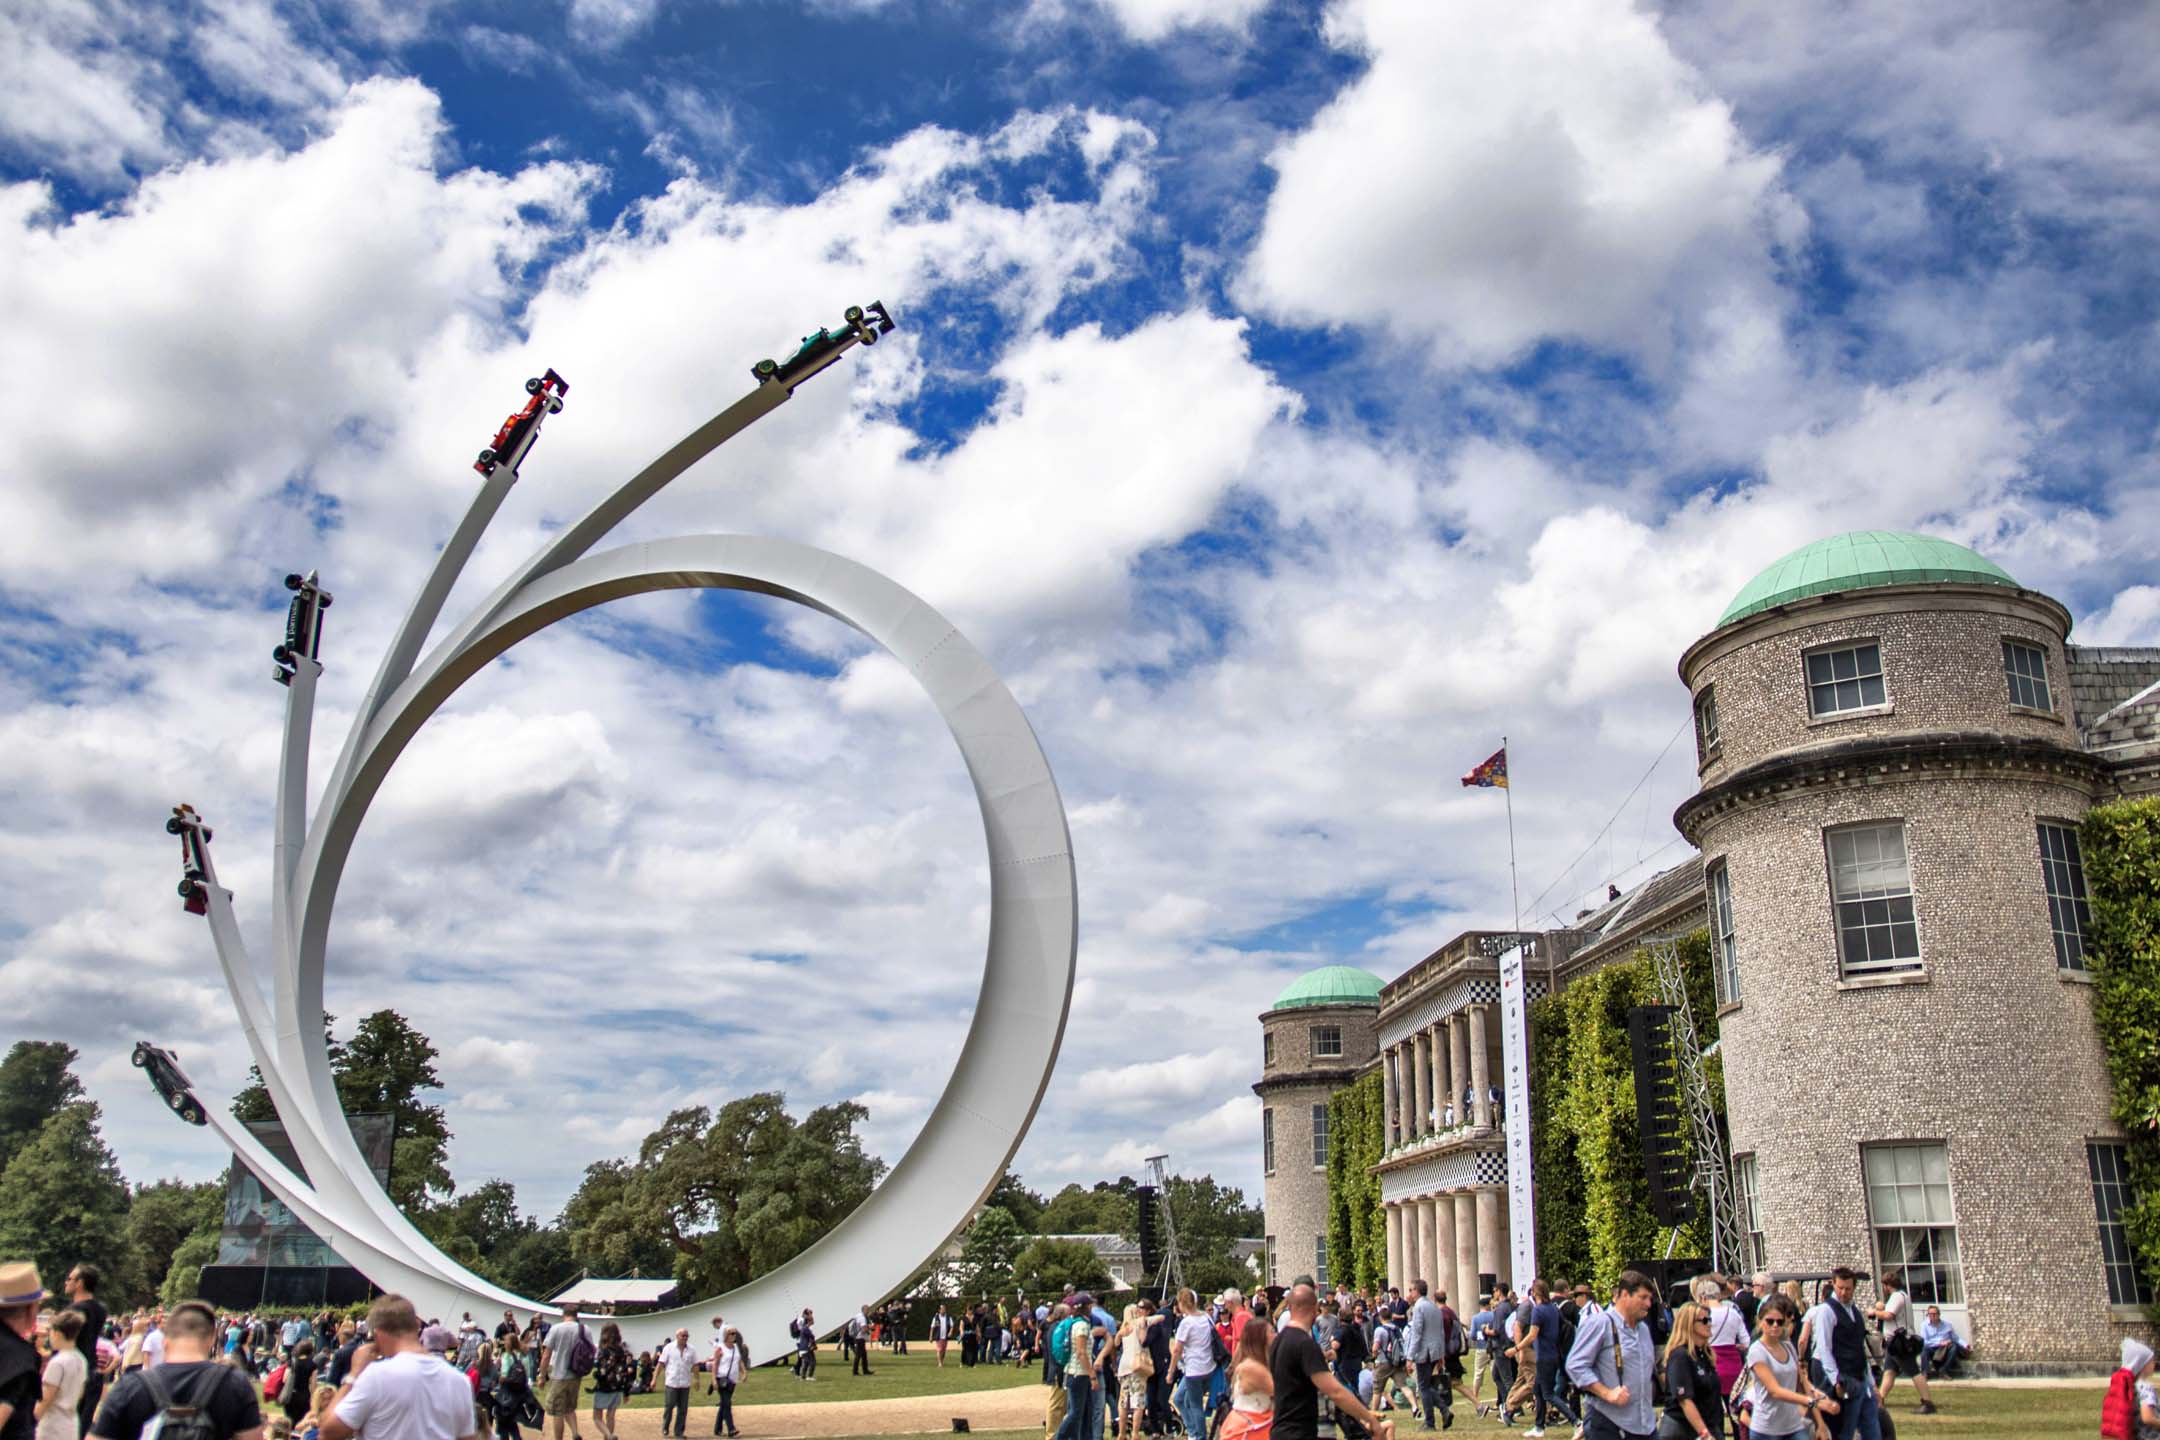 Towering into the sky outside Goodwood’s stately living quarters, a quintet of F1 racing machines arc into the sky. The feature is erected each year, and new cars fixed onto it, depending on the theme of the show.